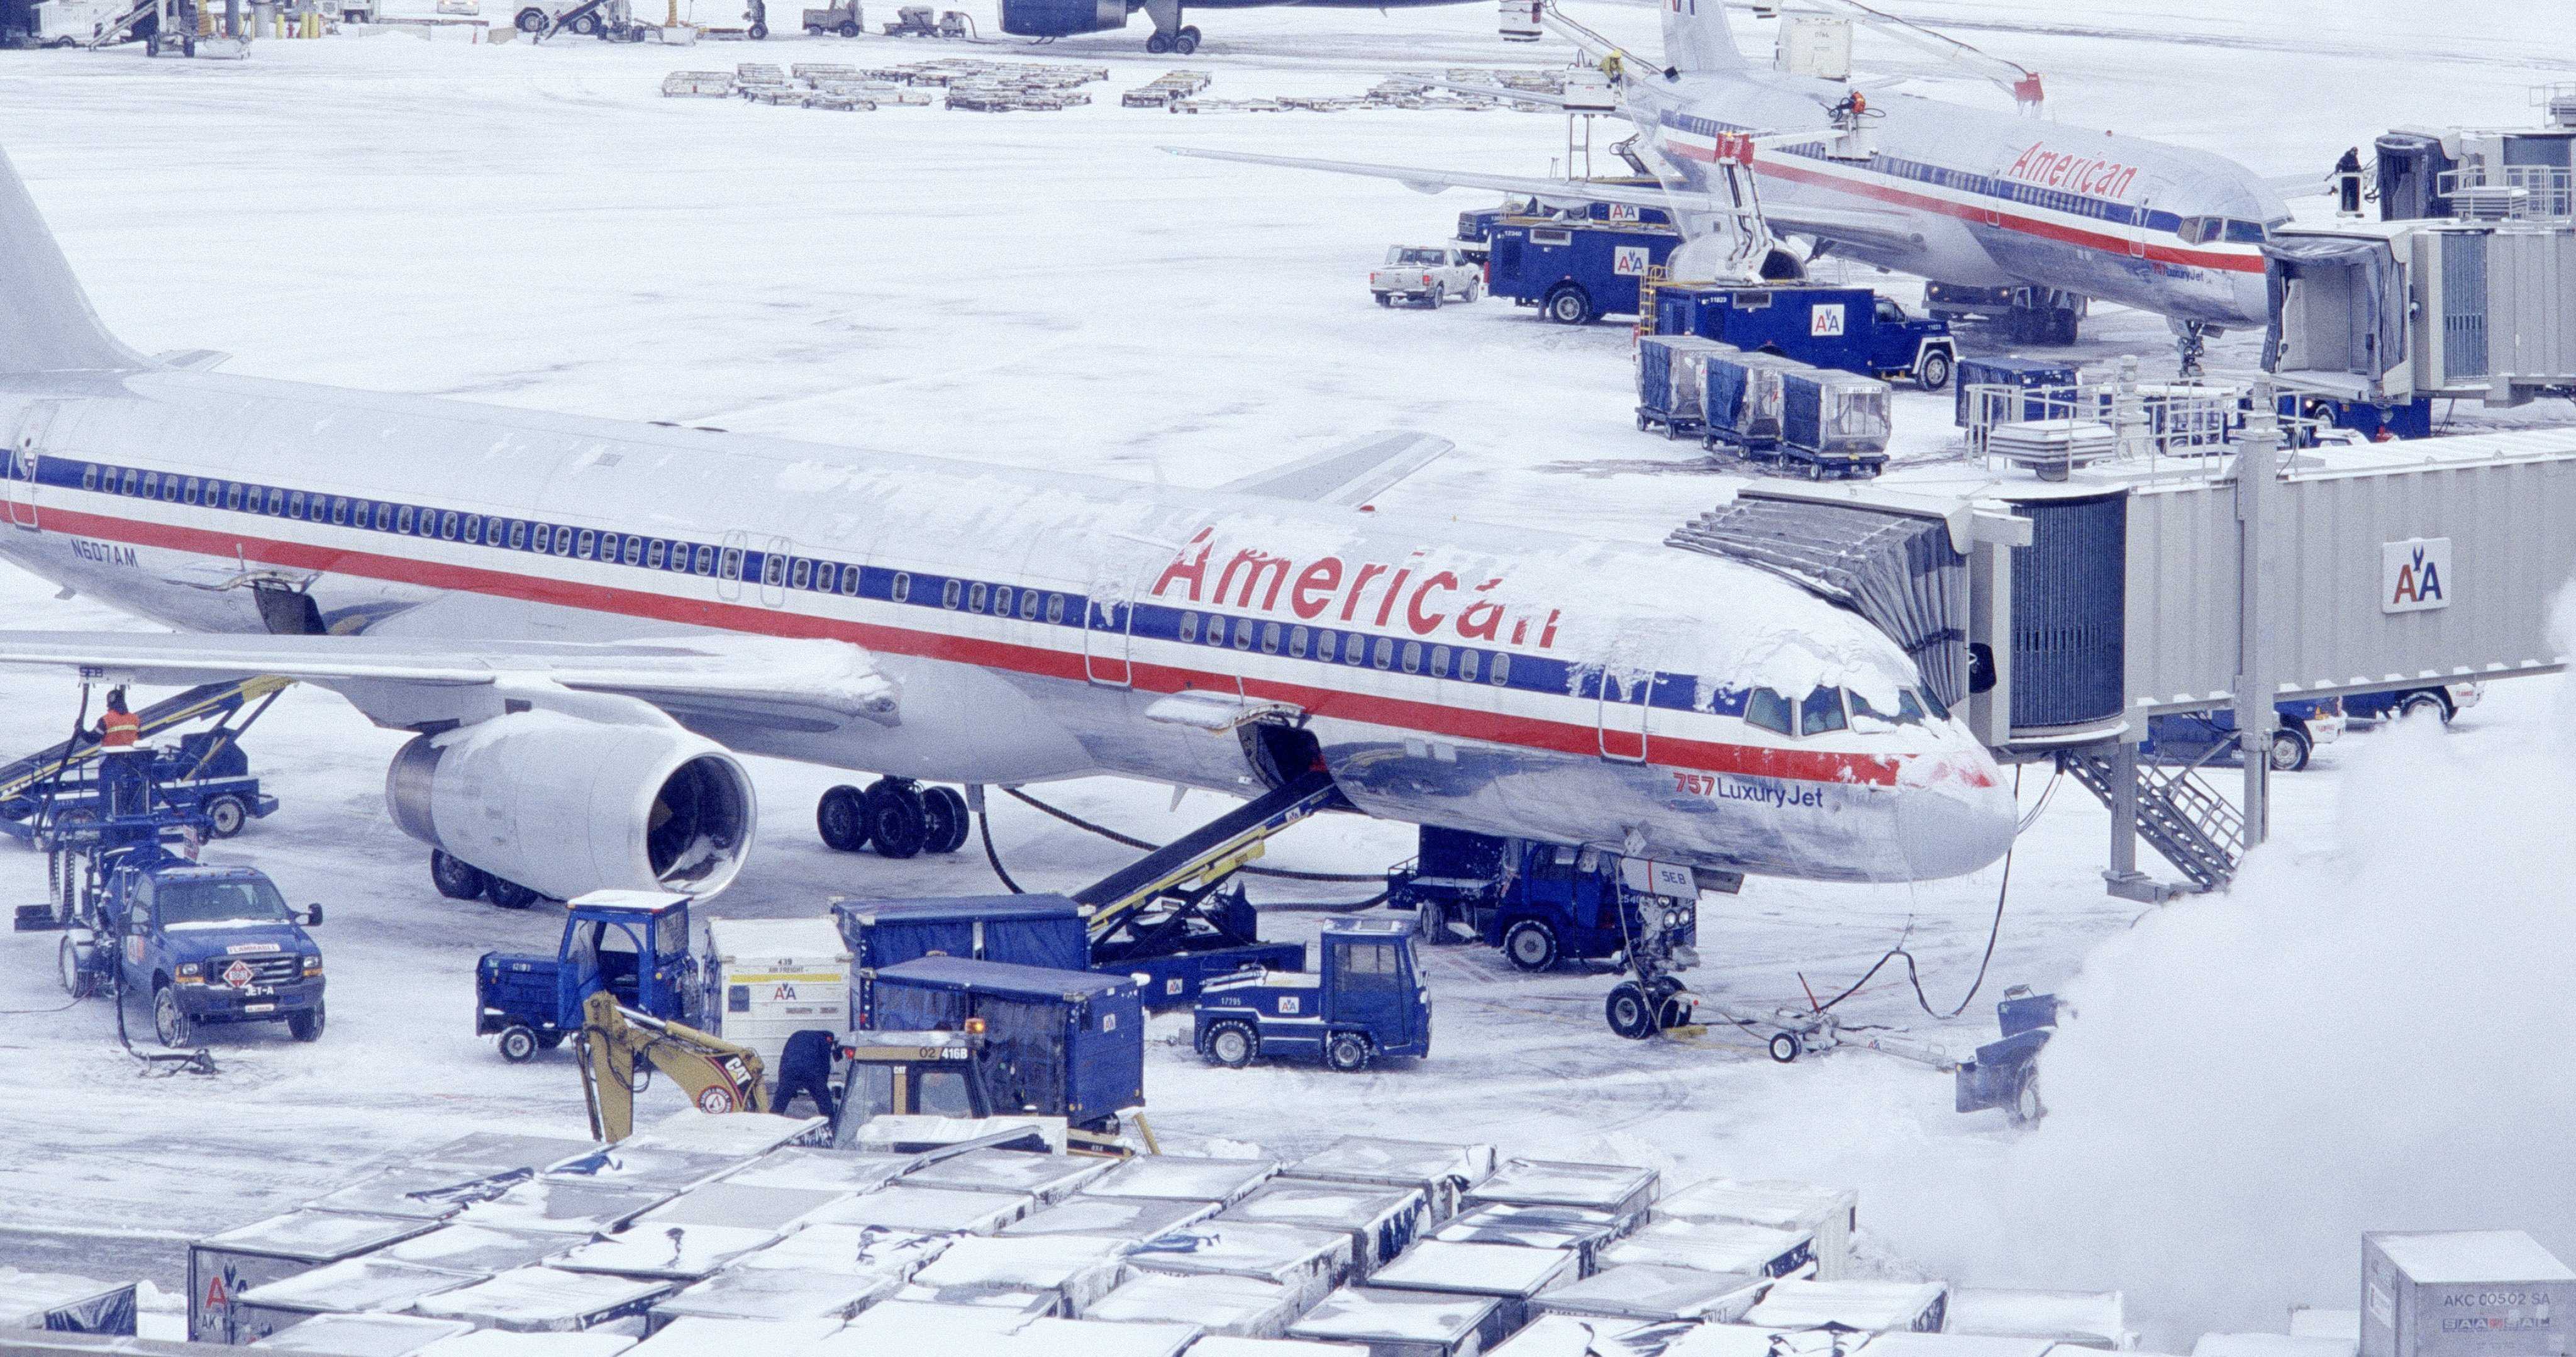 More than 1,500 flights canceled as snowstorm slams Midwest